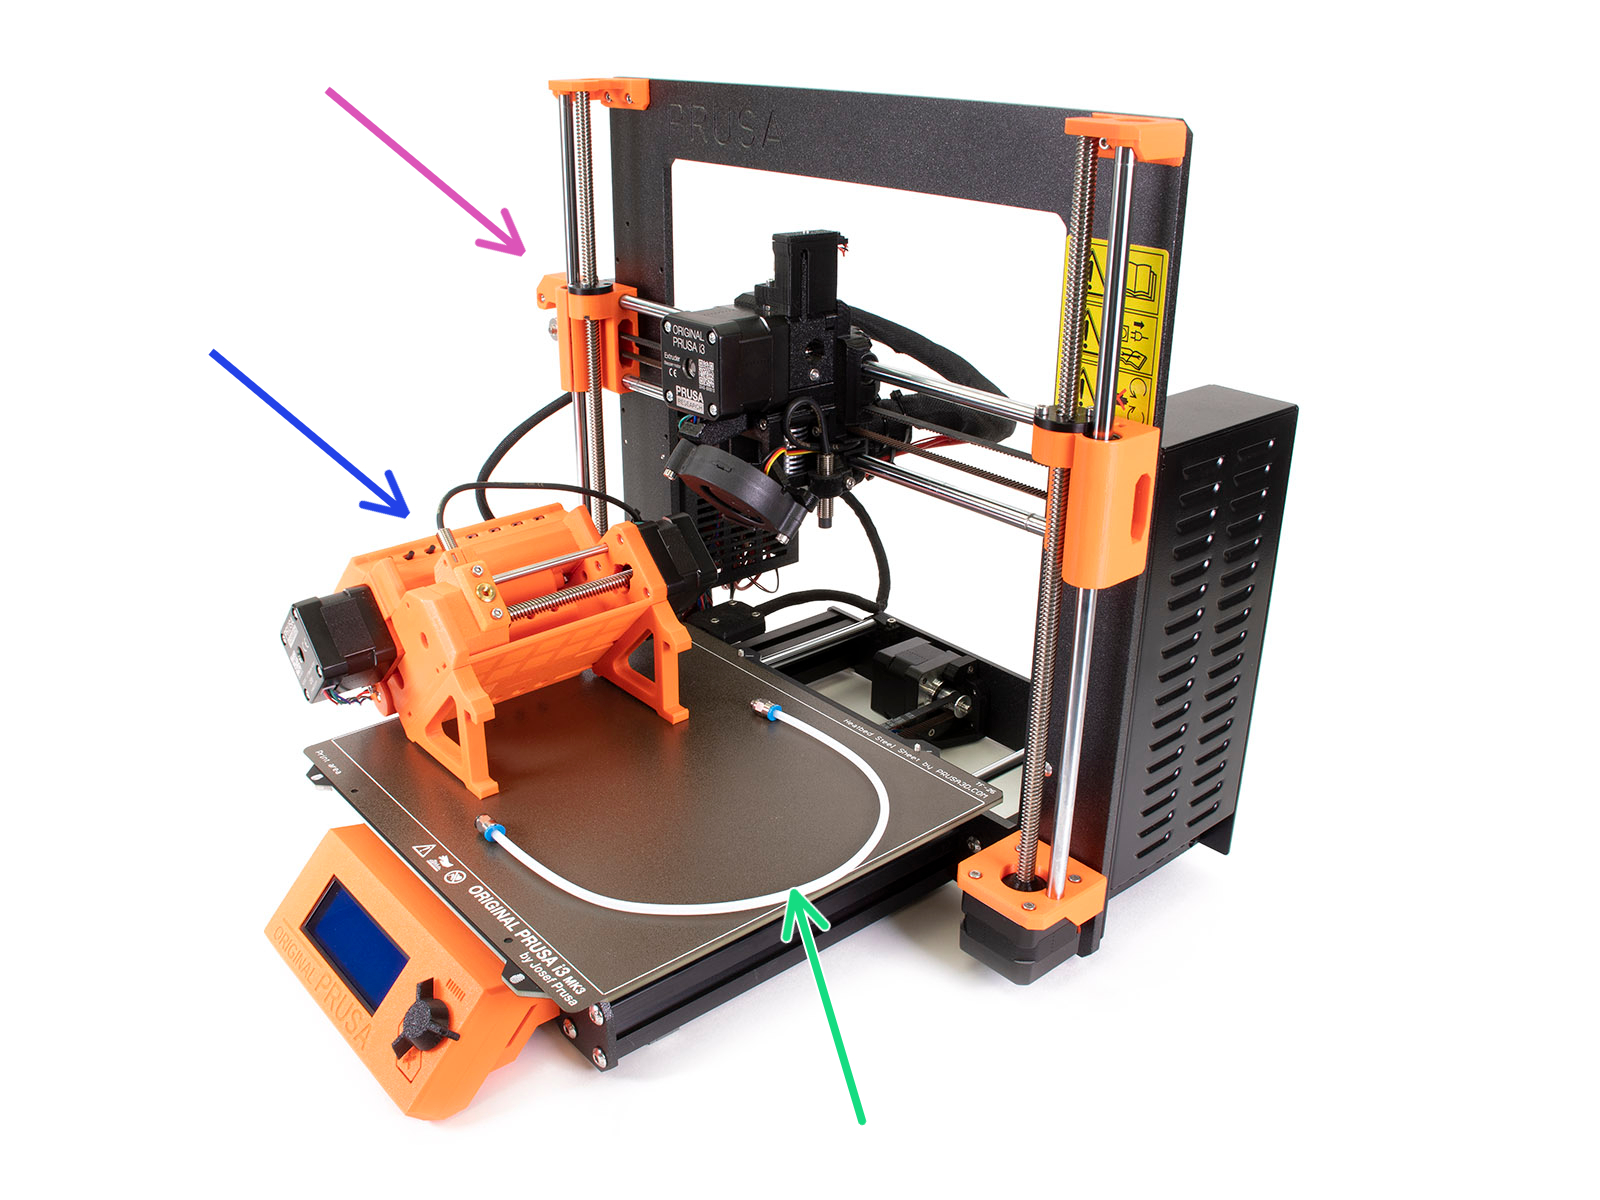 PC/タブレット PC周辺機器 6. Electronics and MMU2S unit assembly | Prusa Knowledge Base